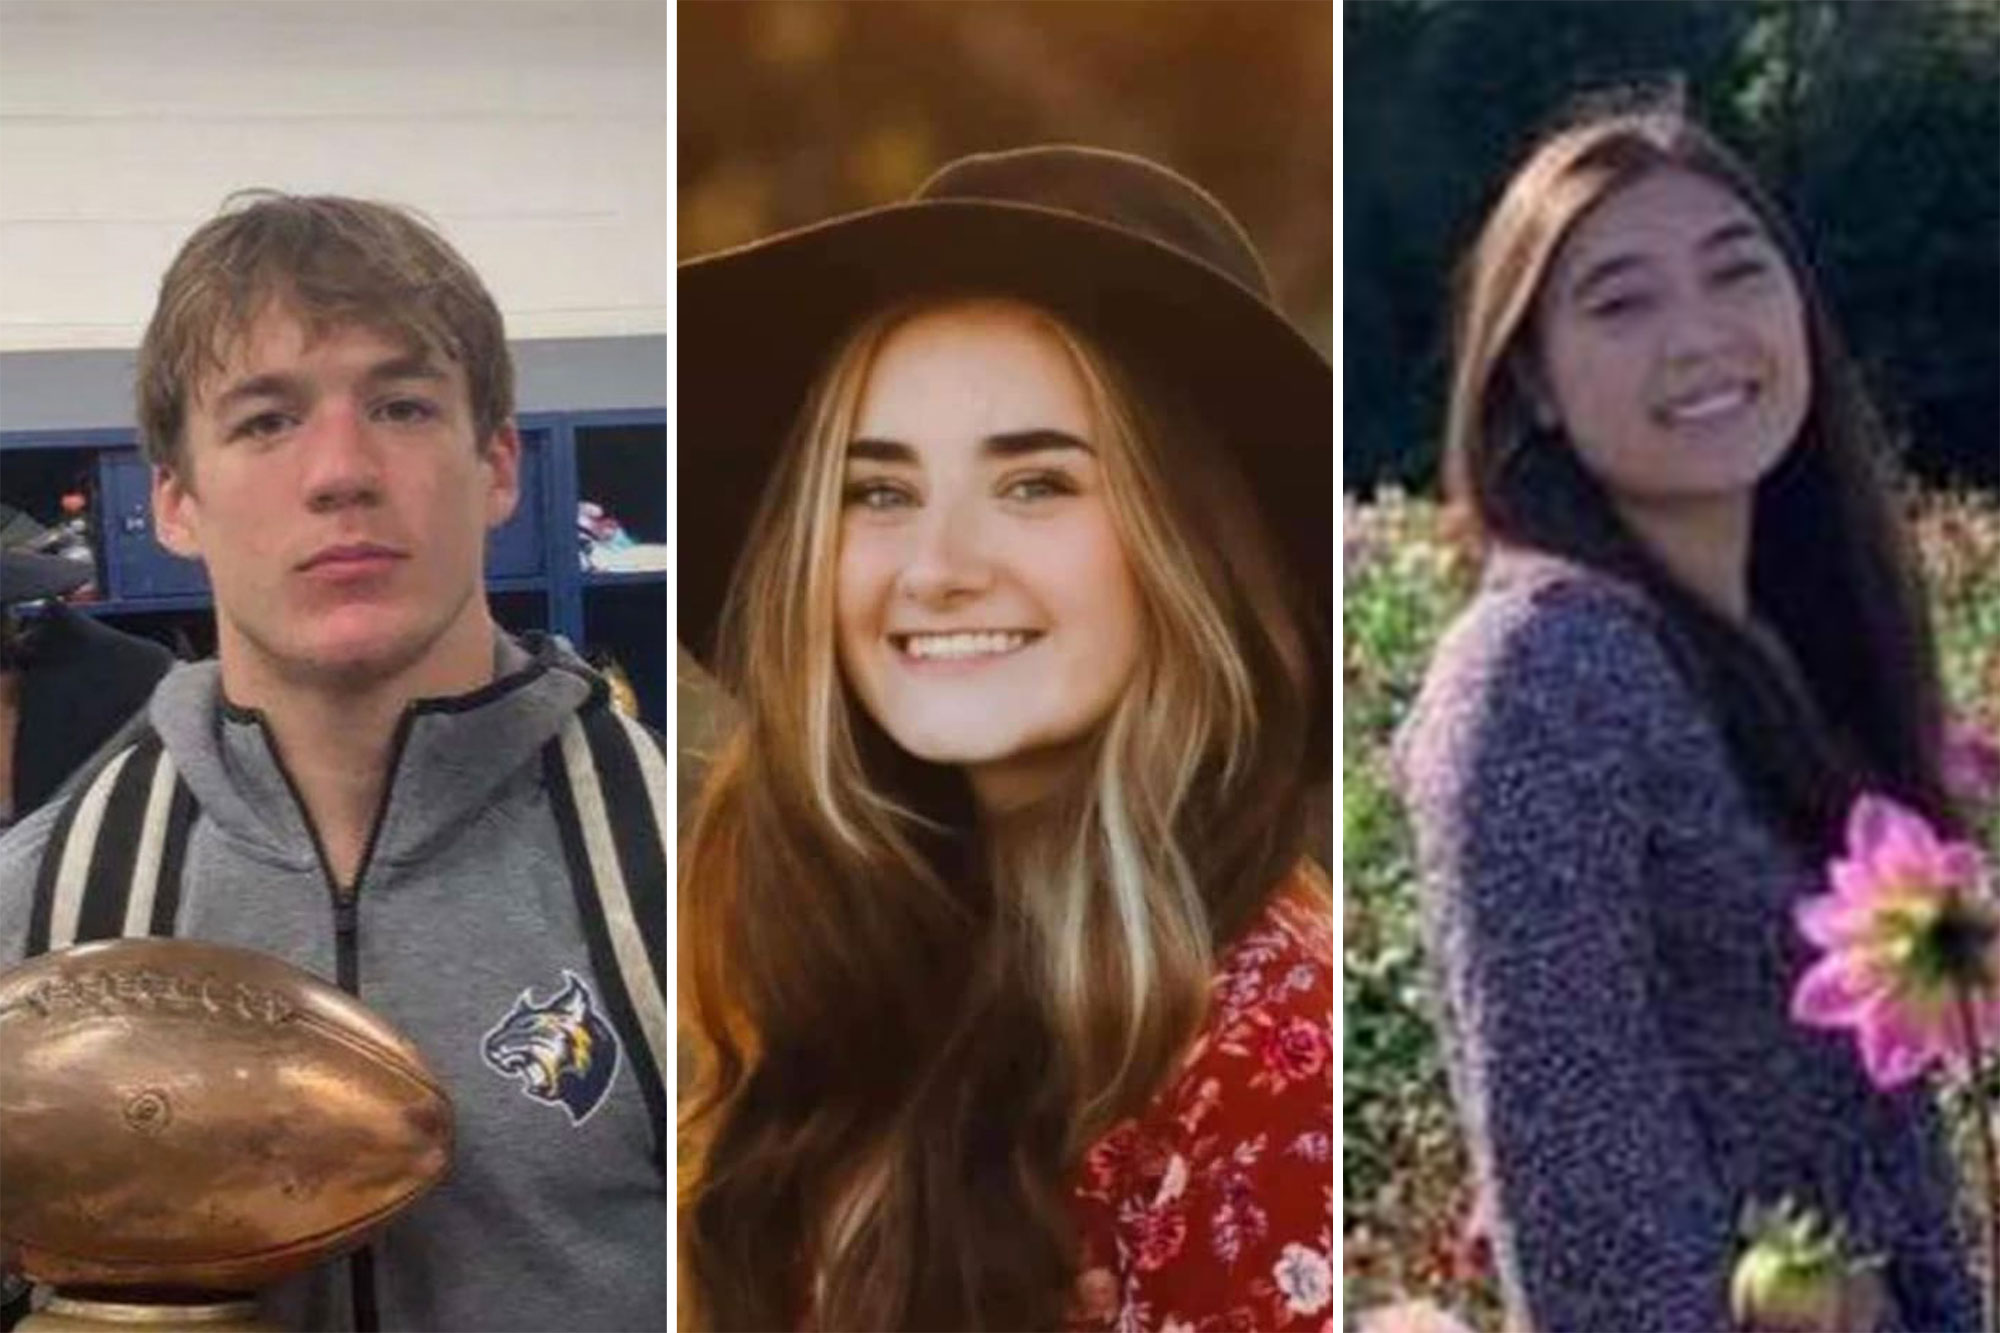 Tate Myre (from left) was a 16-year-old “standout” football player at Oxford High School who died from his wounds in the shooting. Madisyn Baldwin and Hana St. Juliana were also among the deceased victims. (Facebook/Twitter)